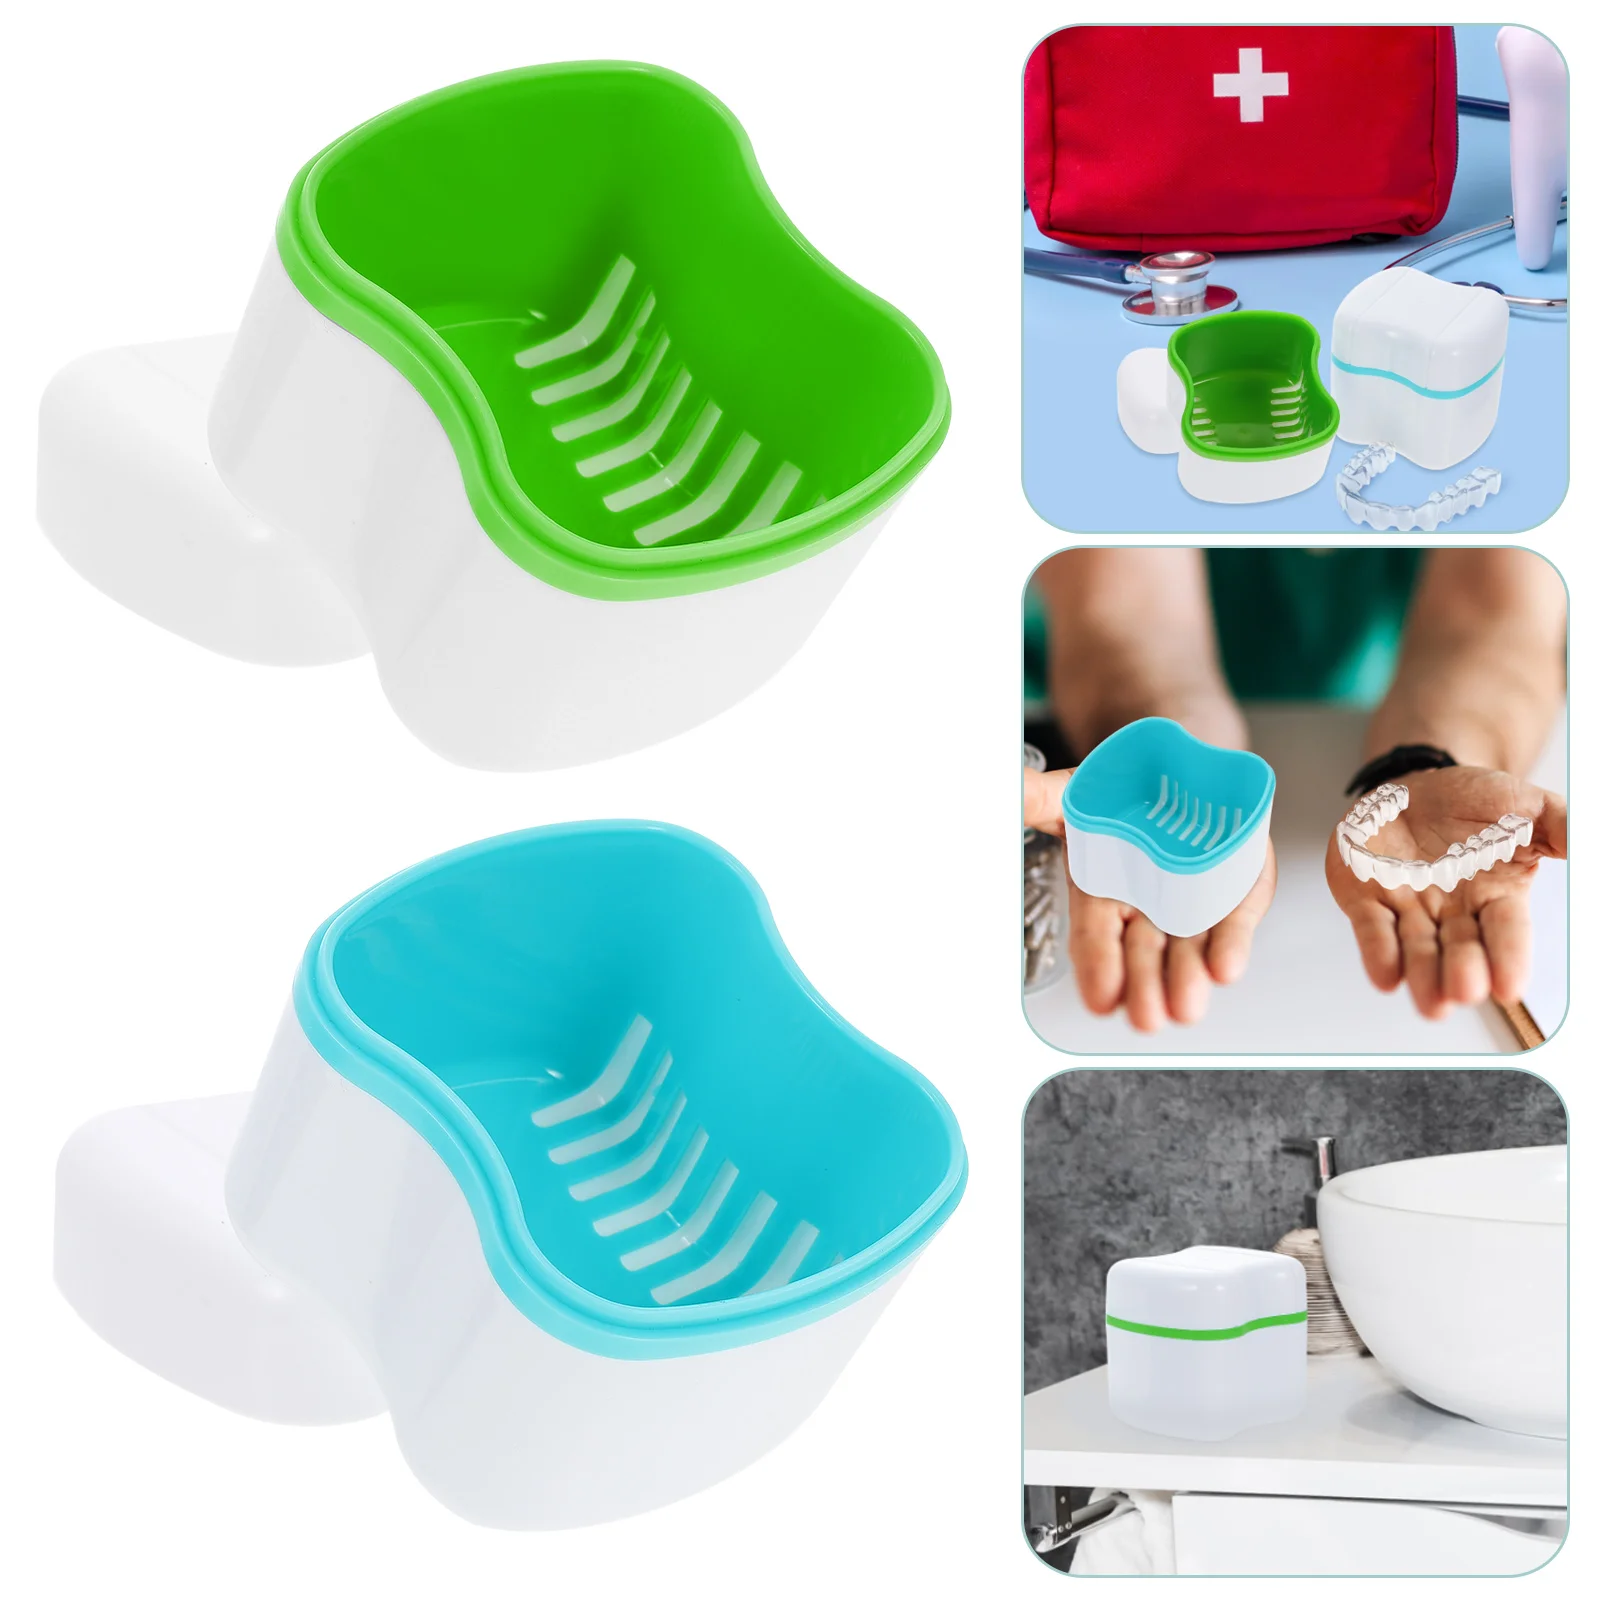 

2 Pcs Denture Storage Box Fake Teeth Retainer Cleaner Containers Cup Cleaning Pp Cases